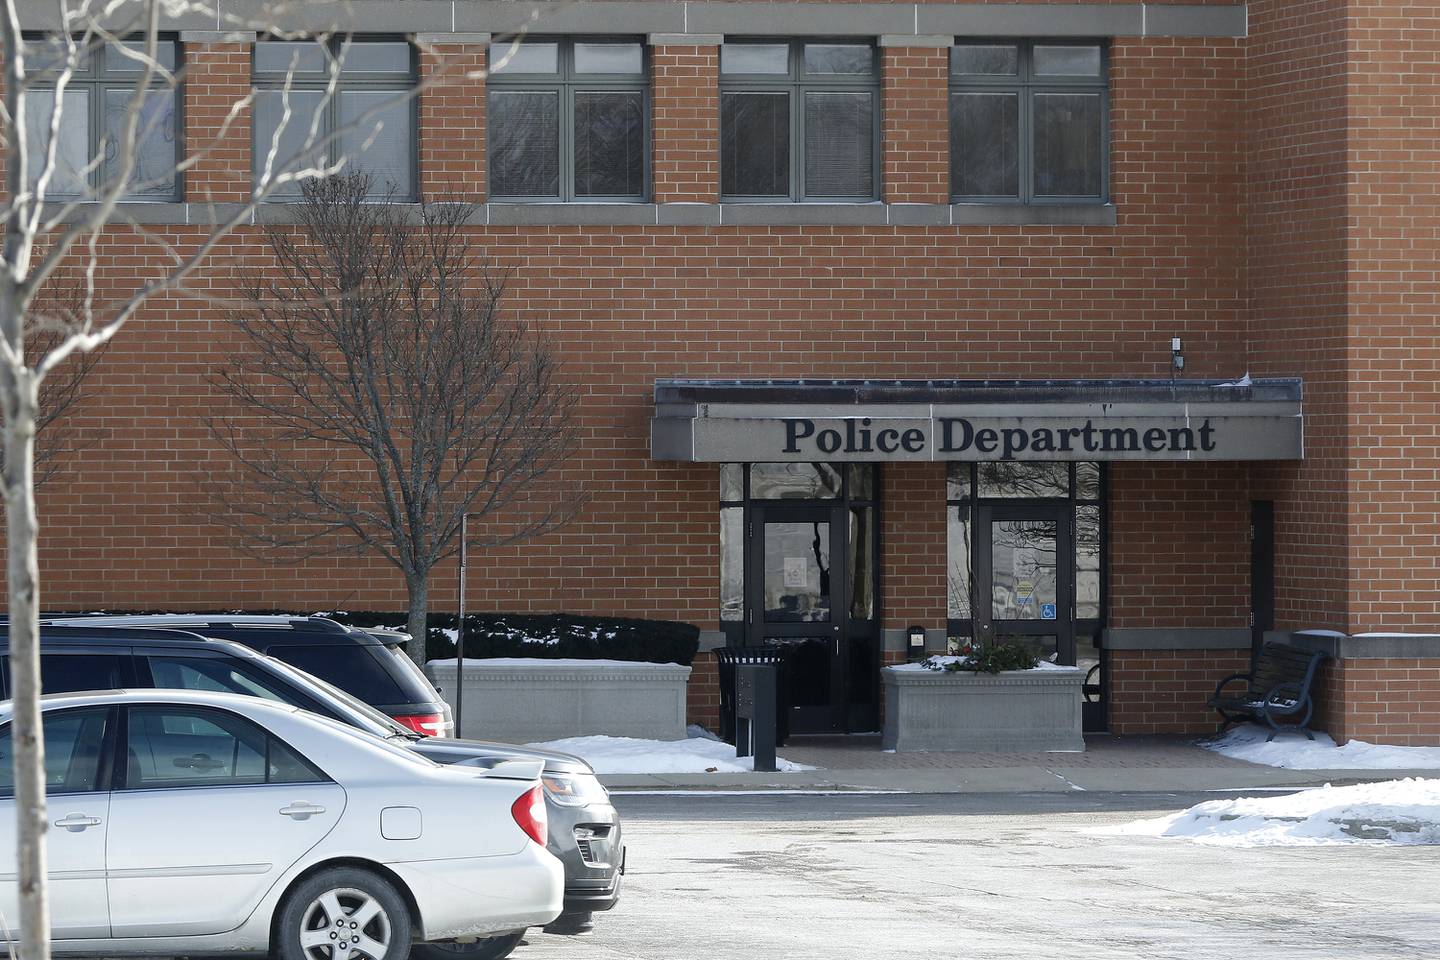 The McHenry Police Department is seen on Wednesday, Jan. 5, 2022 in McHenry. City staff says major rehabilitations of the police department's men's locker room and processing area for detainees should be scheduled in 2022 and 2023, respectively, and the projects could cost $600,000 total.